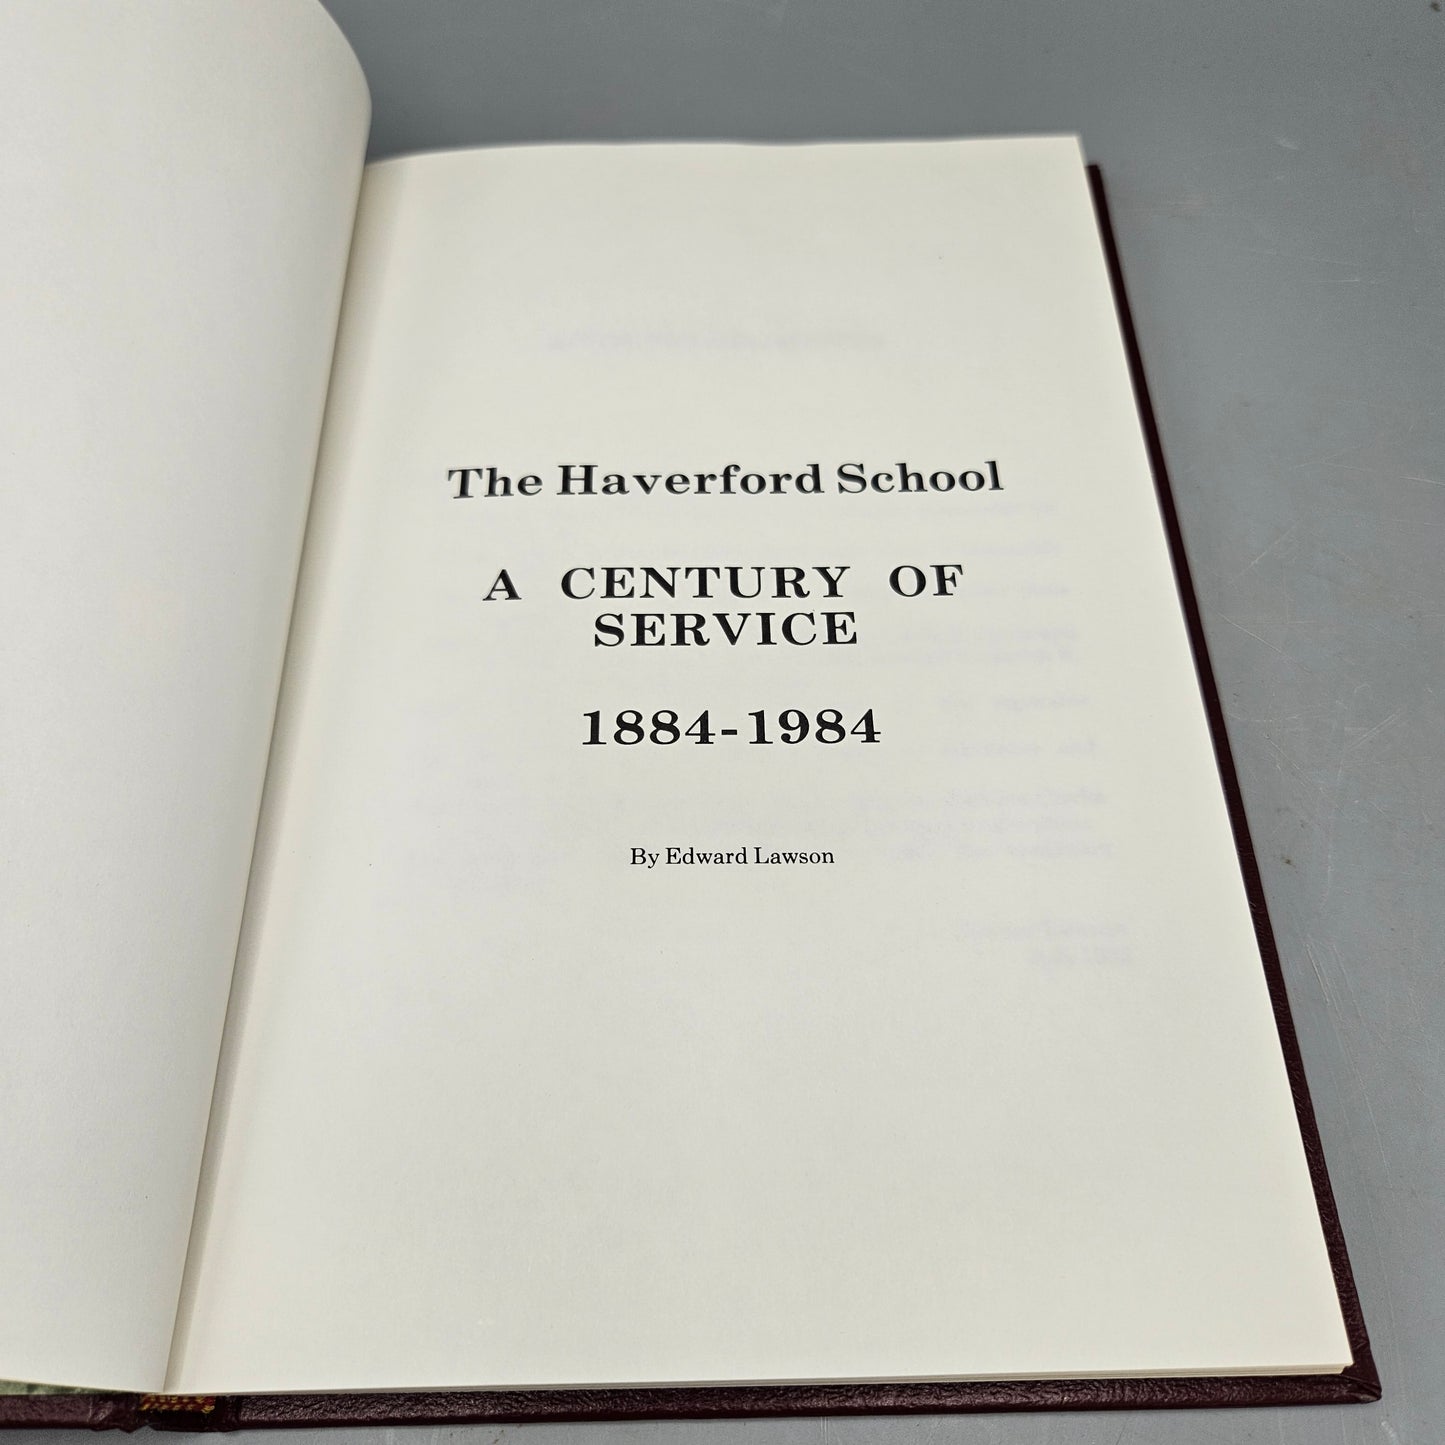 Book: The Haverford School A Century of Service 1884-1984 by Edward Lawson